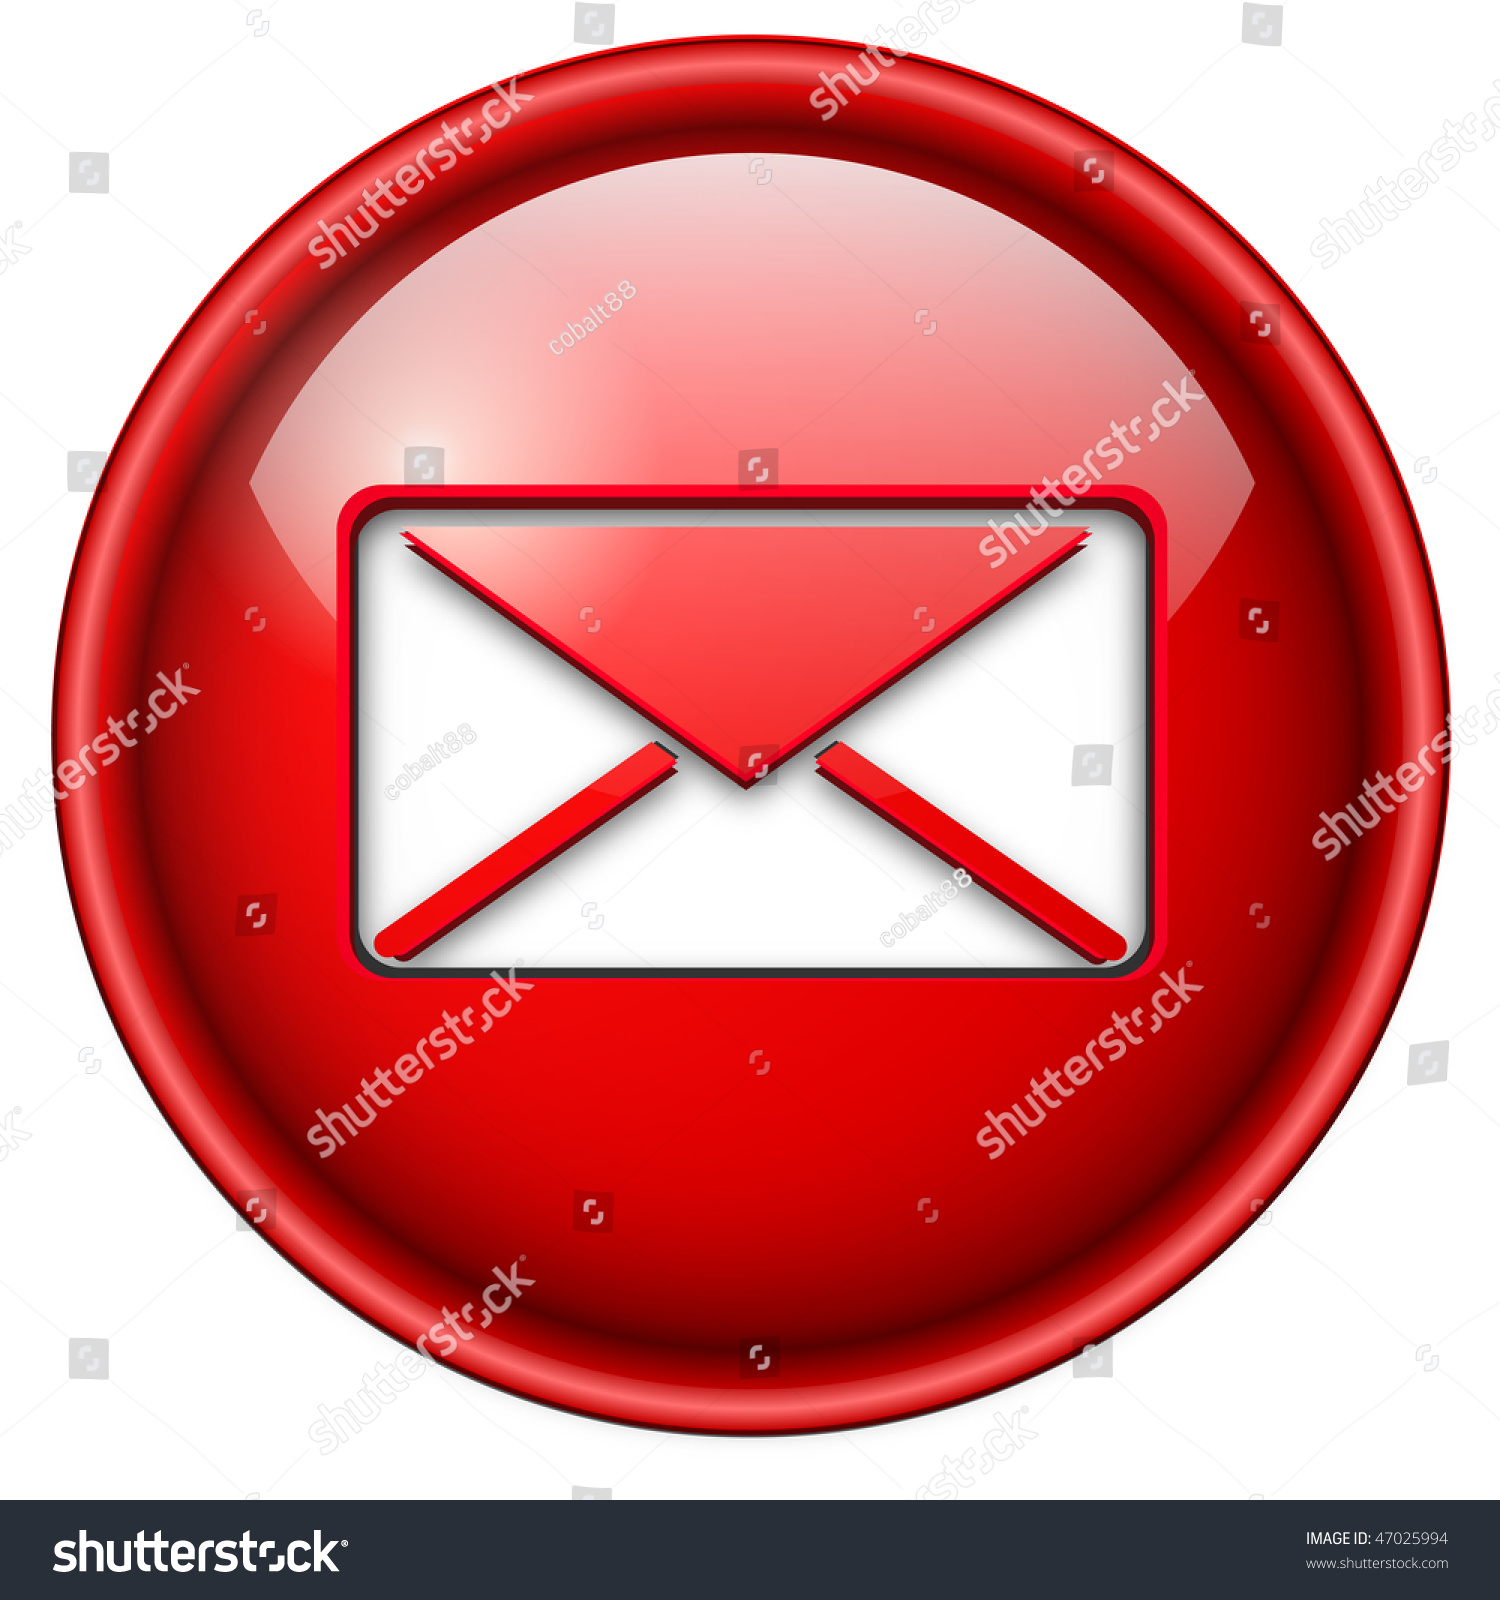 Mail, Email Icon, Button, 3d Red Glossy Circle. Stock Vector